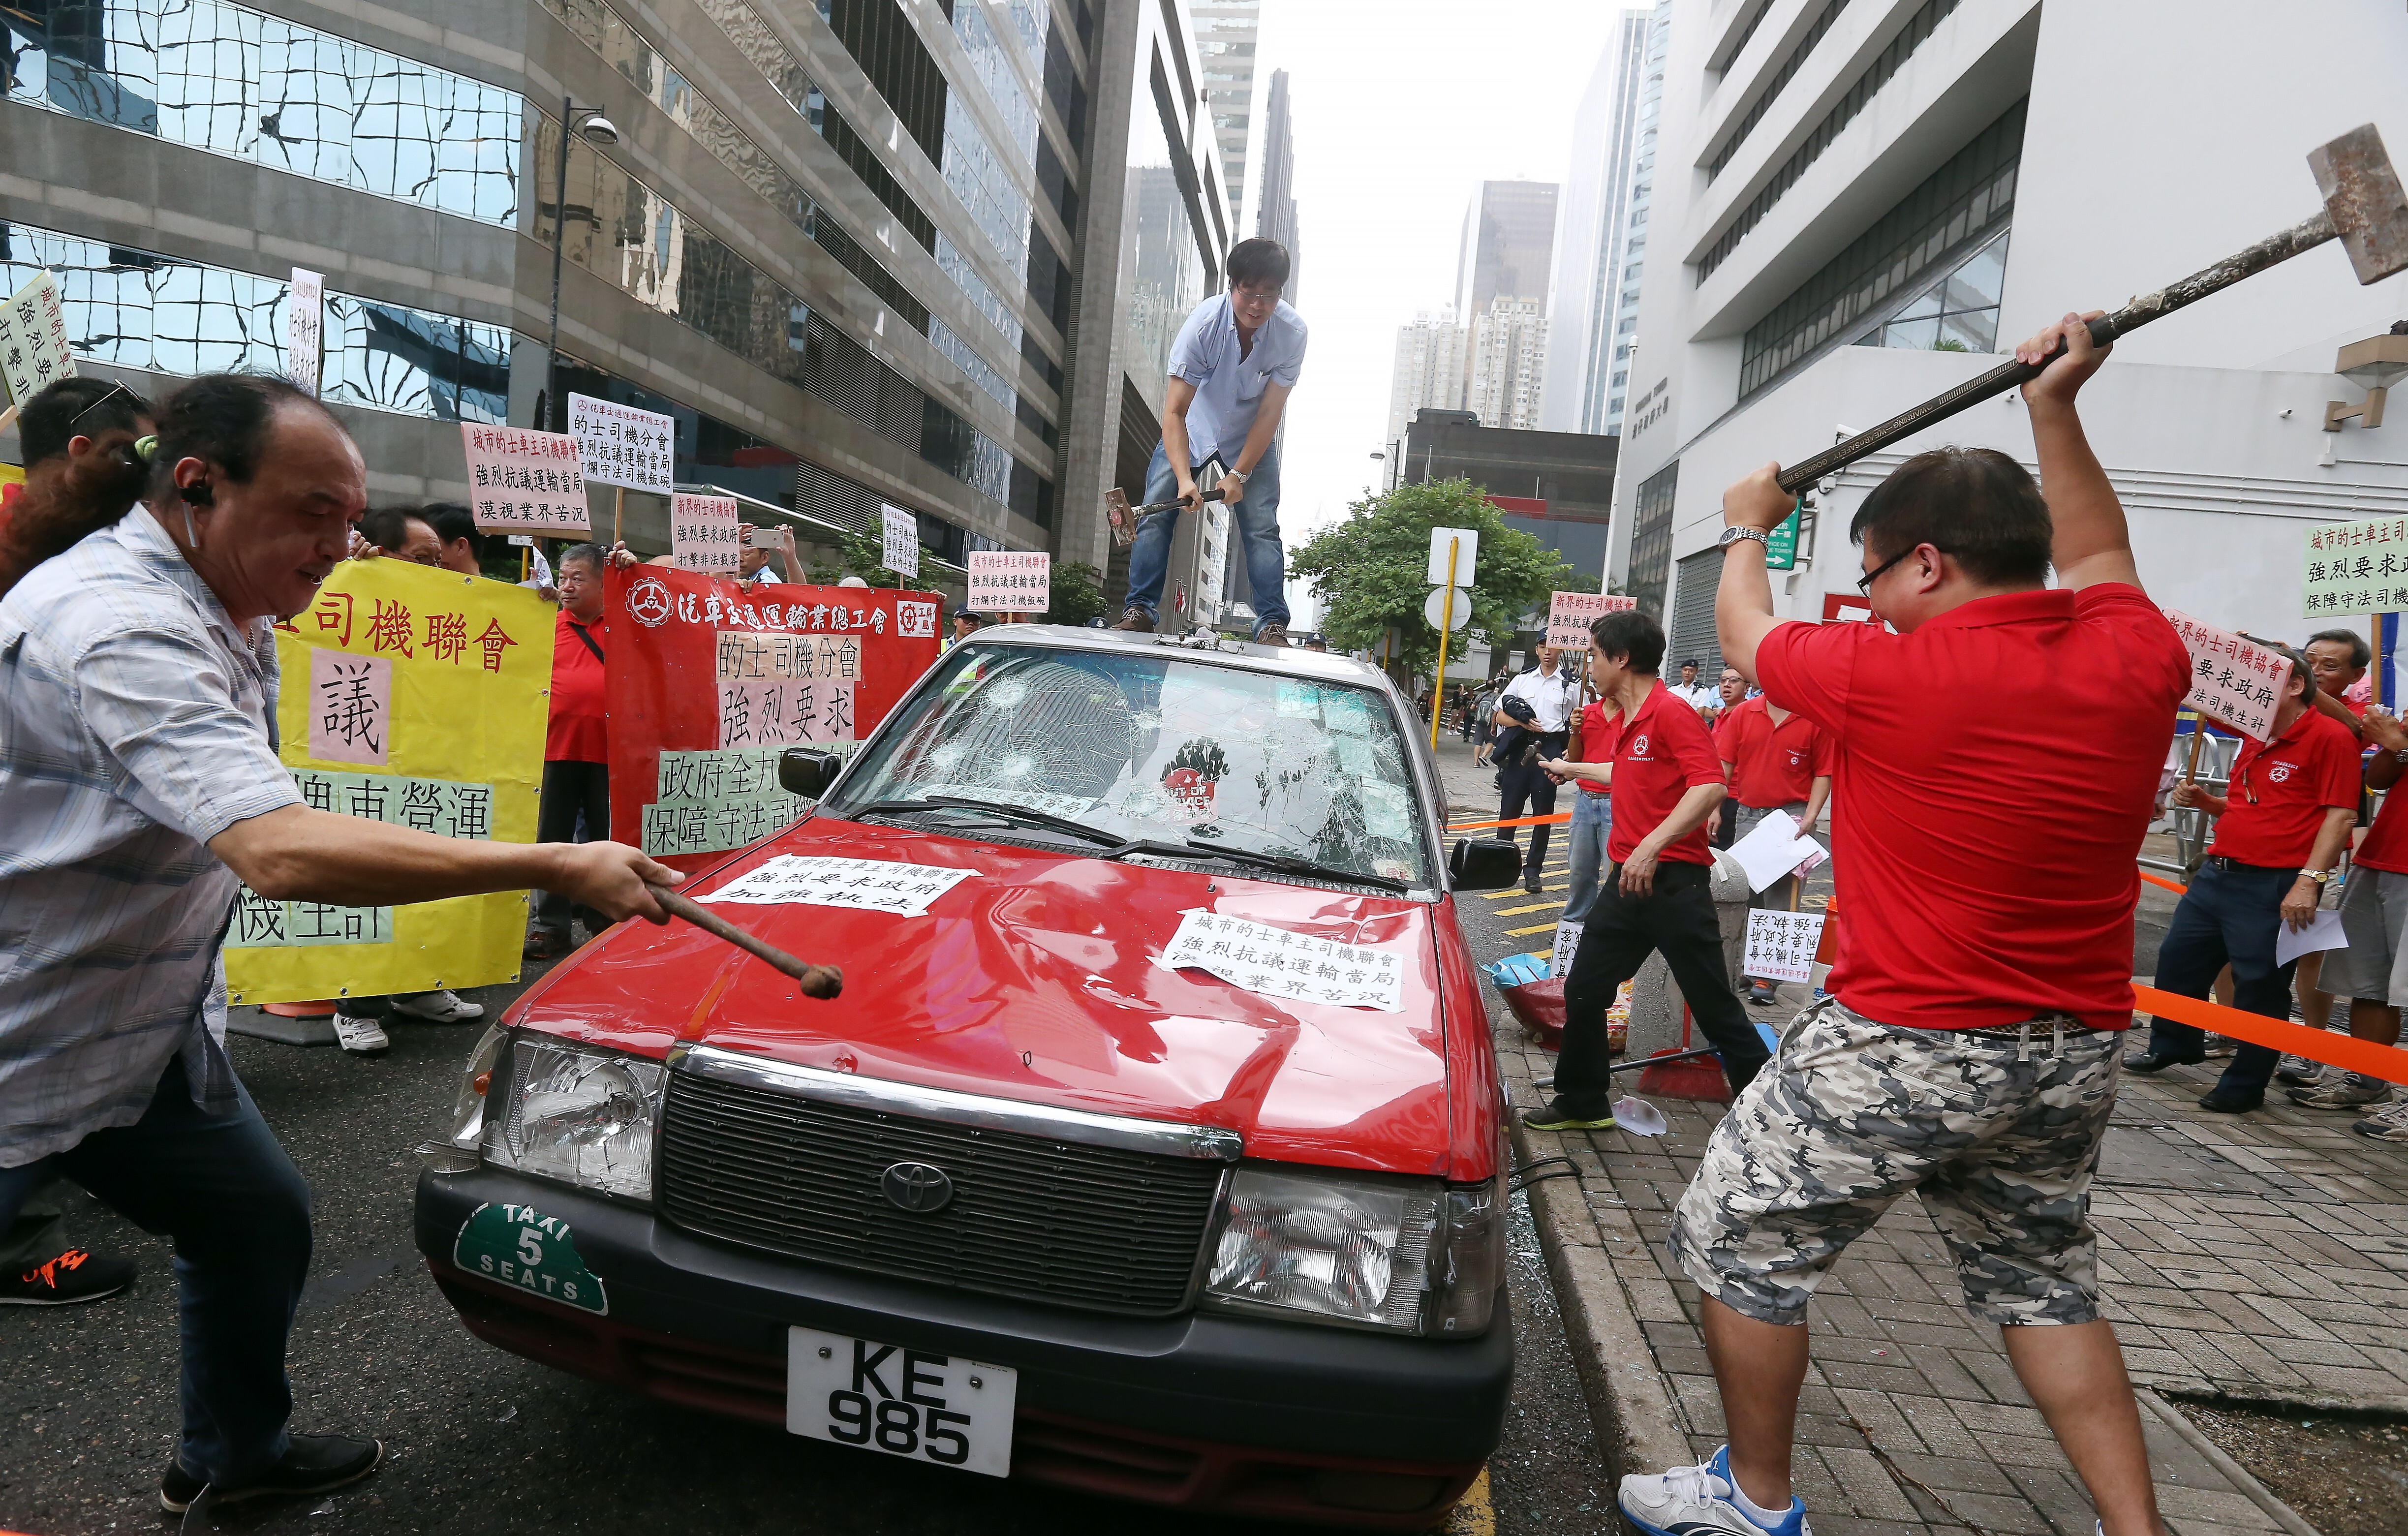 Taxi drivers smash one of their own vehicles as they call on the Hong Kong government to ban ride-hailing services like Uber, in Wan Chai in July 2015. The tussle continues in 2021. Photo: Dickson Lee